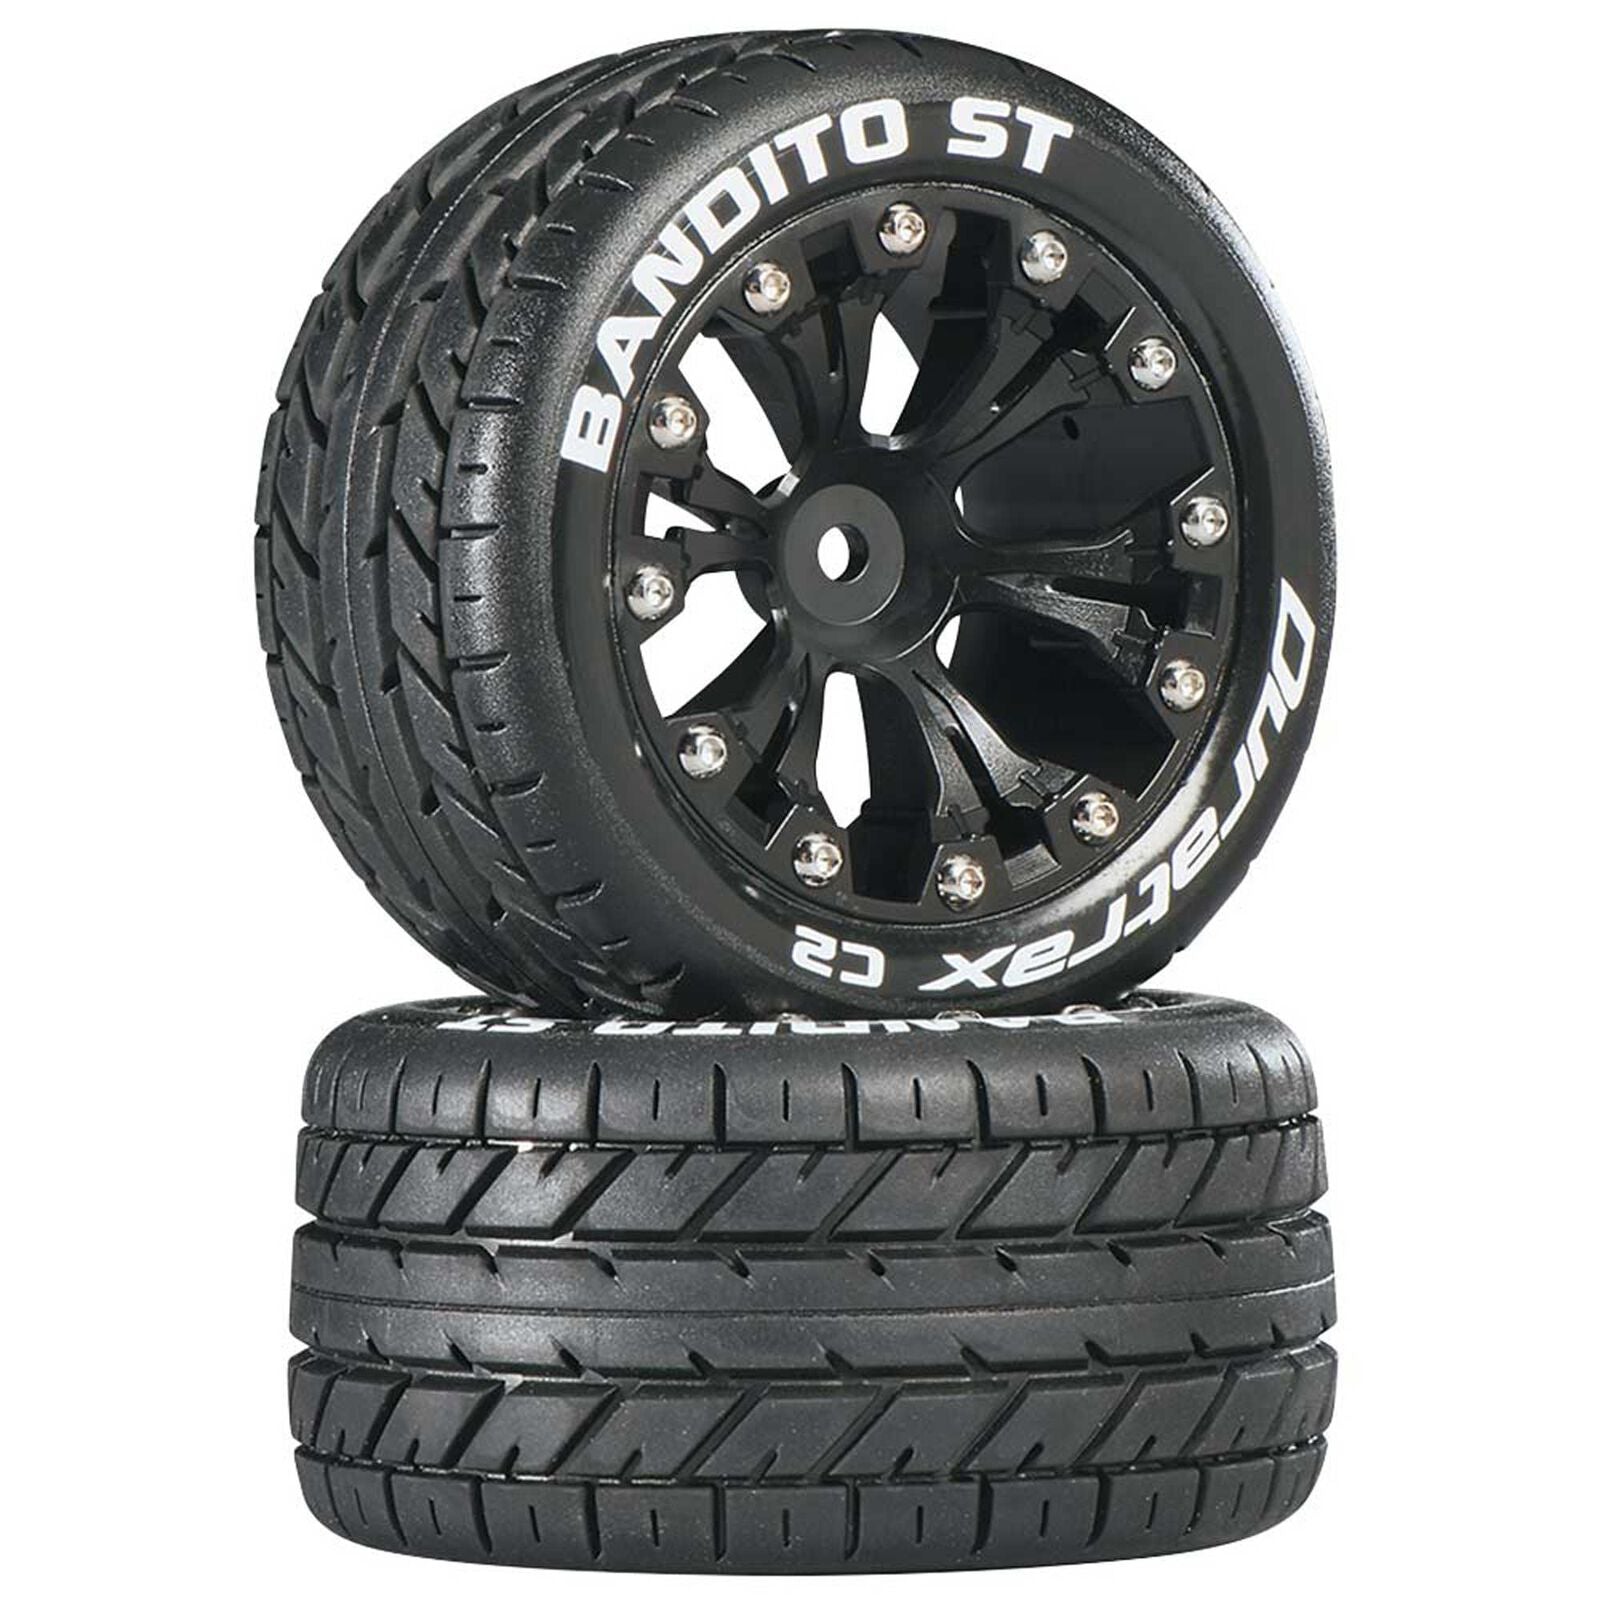 DURATRAX DTXC3542 Bandito ST 2.8" 2WD Mounted Rear C2 Tires, Black (2)